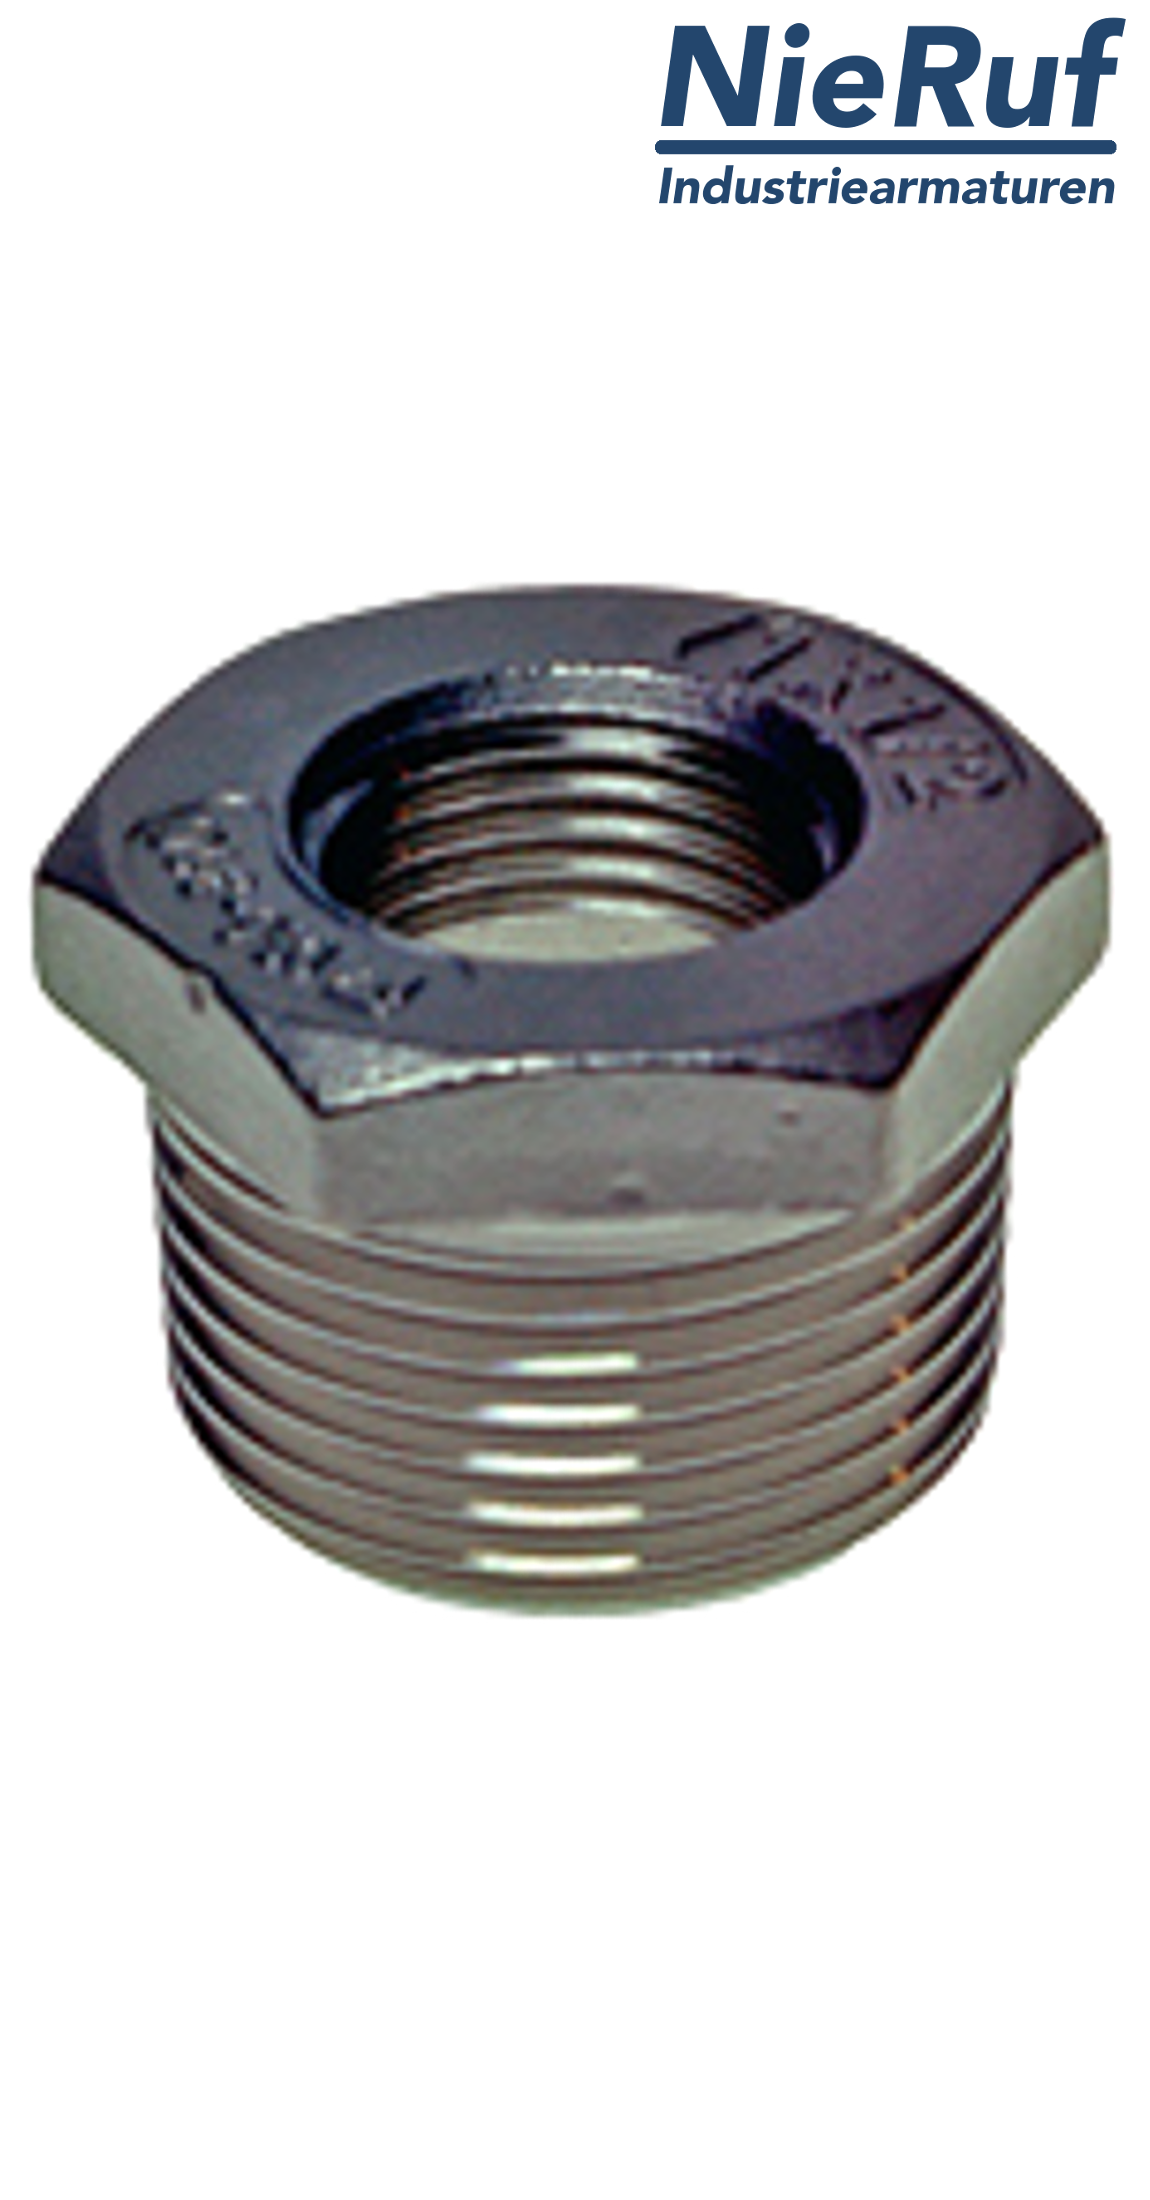 reducing bush 3/8" x 1/8" inch NPT male X female stainless steel 316L